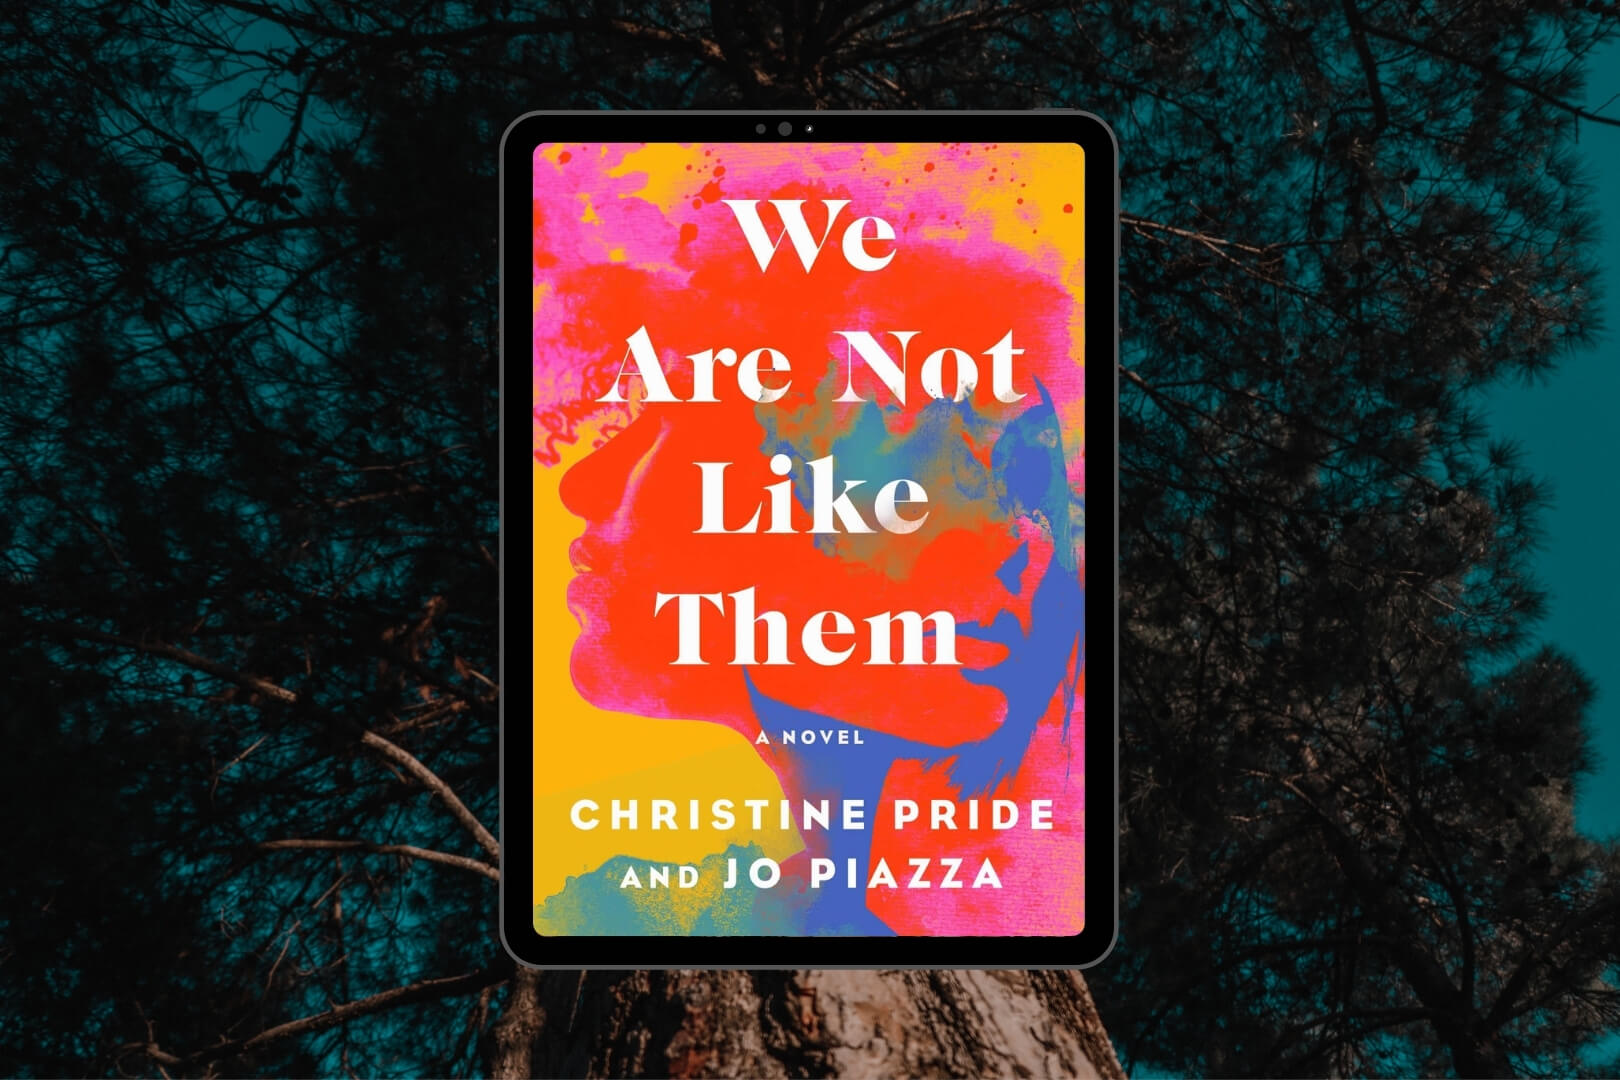 Review: We Are Not Like Them by Christine Pride and Jo Piazza